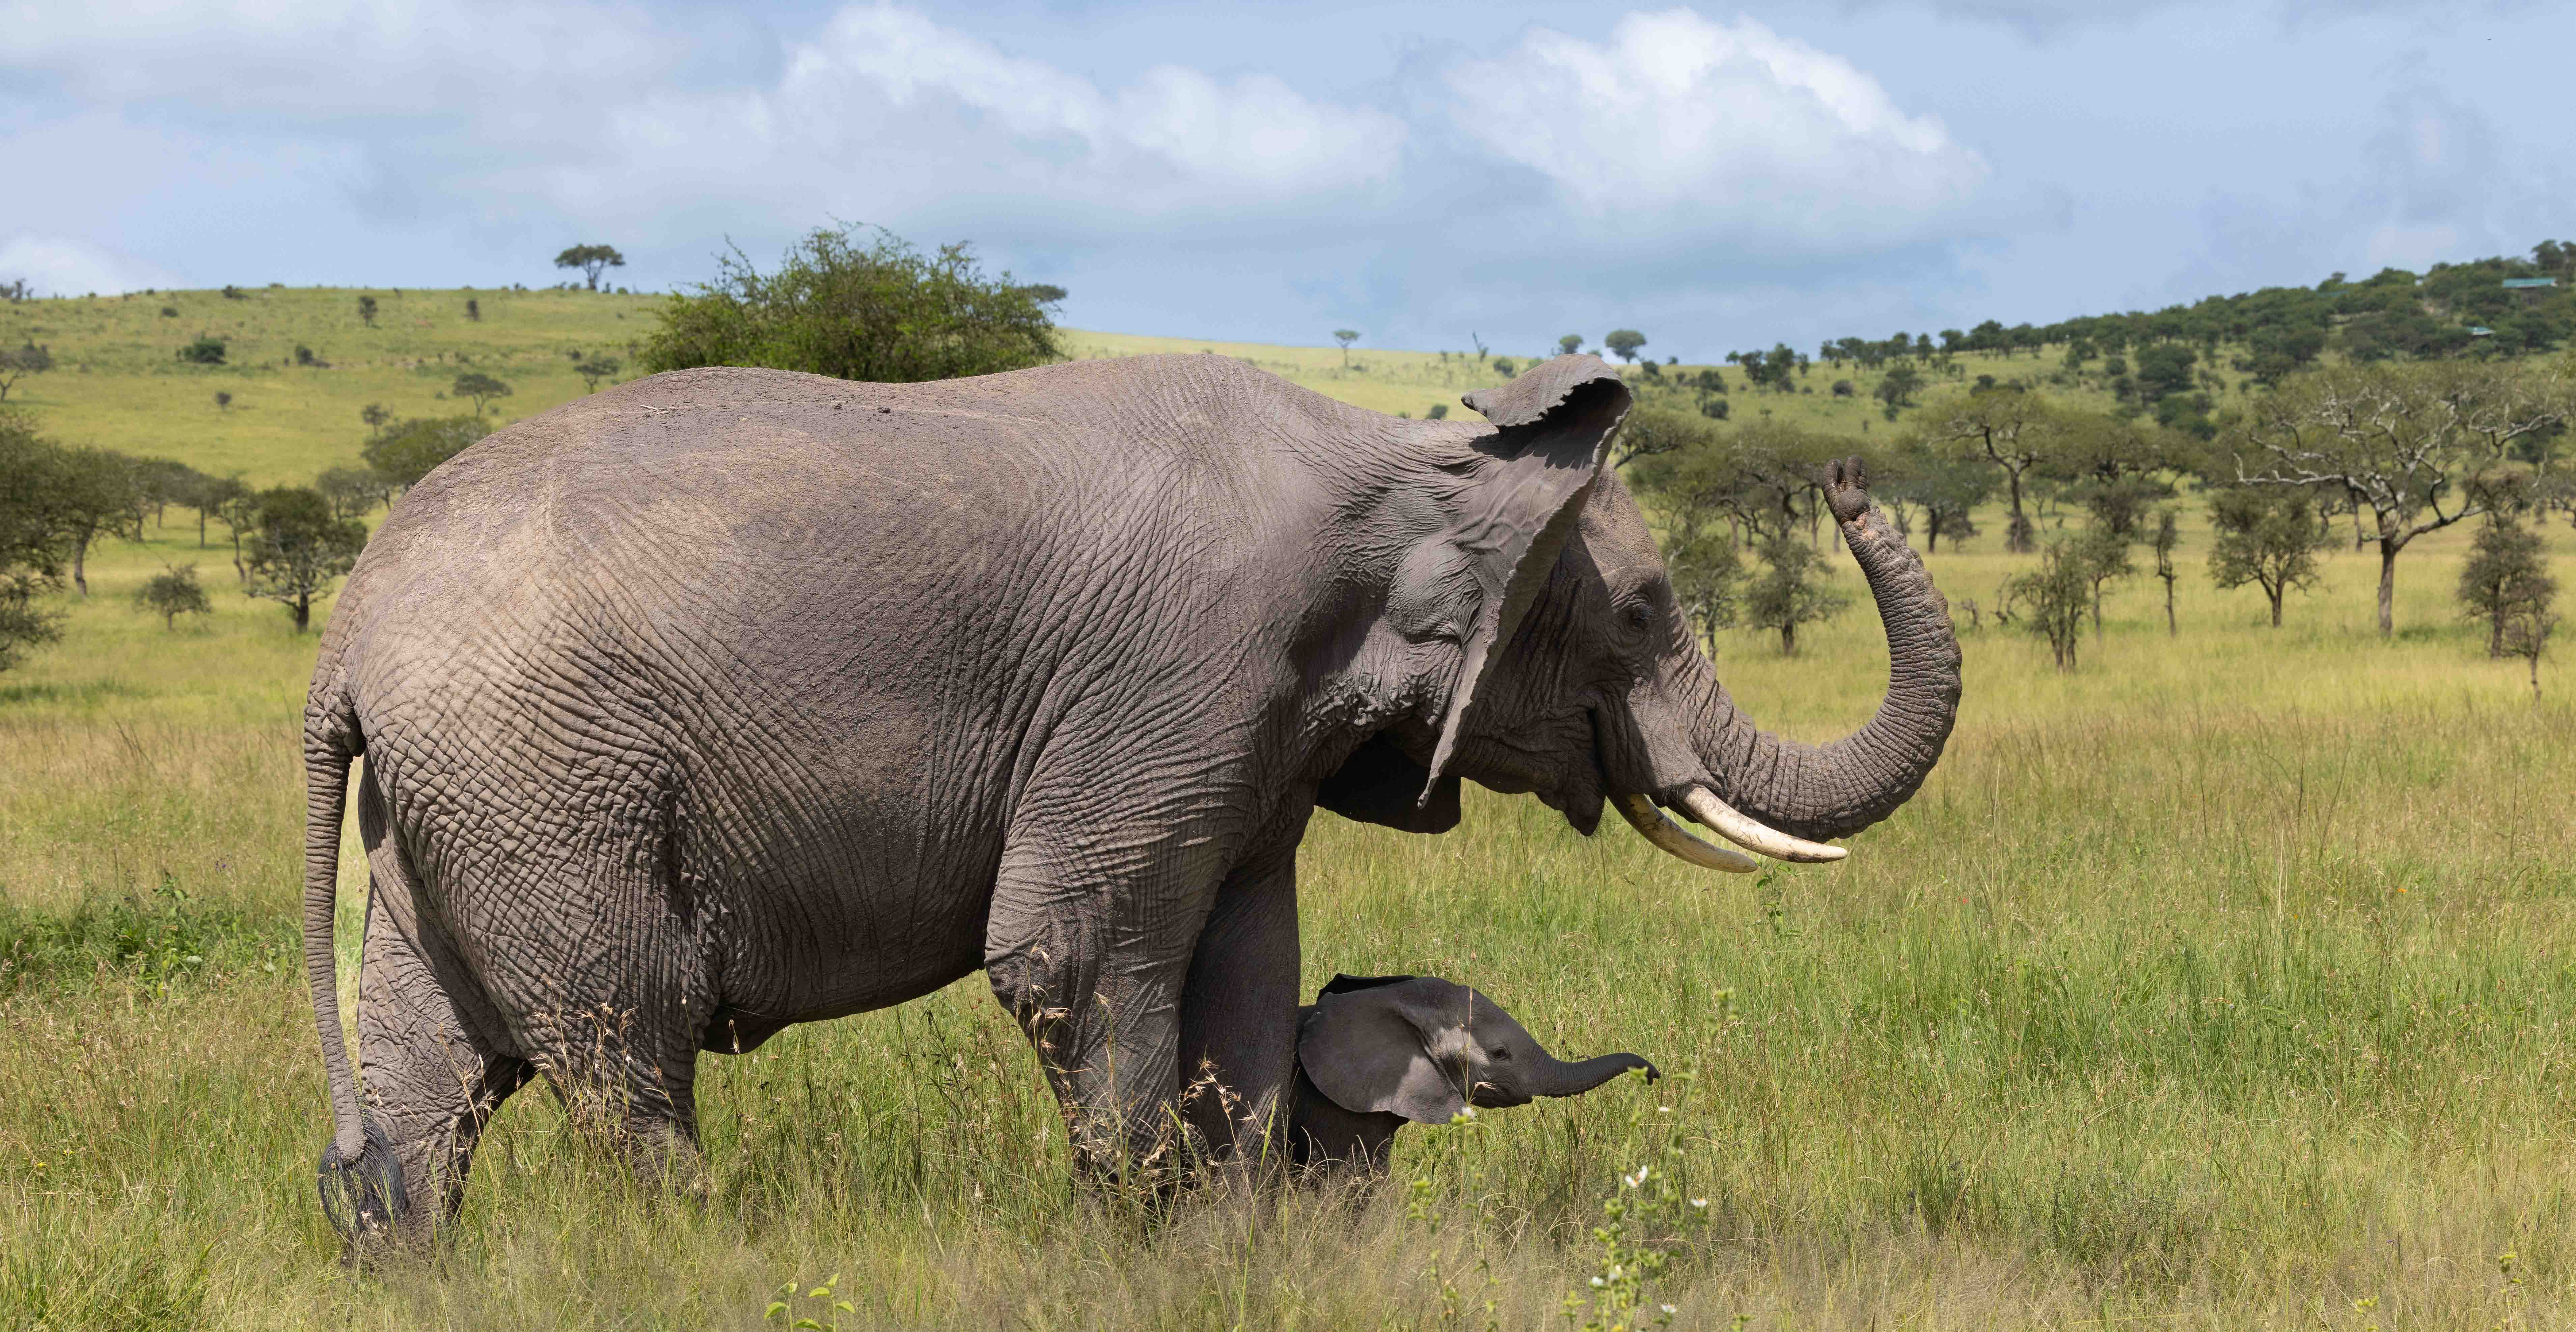 Elephant with baby in Serengeti national park.